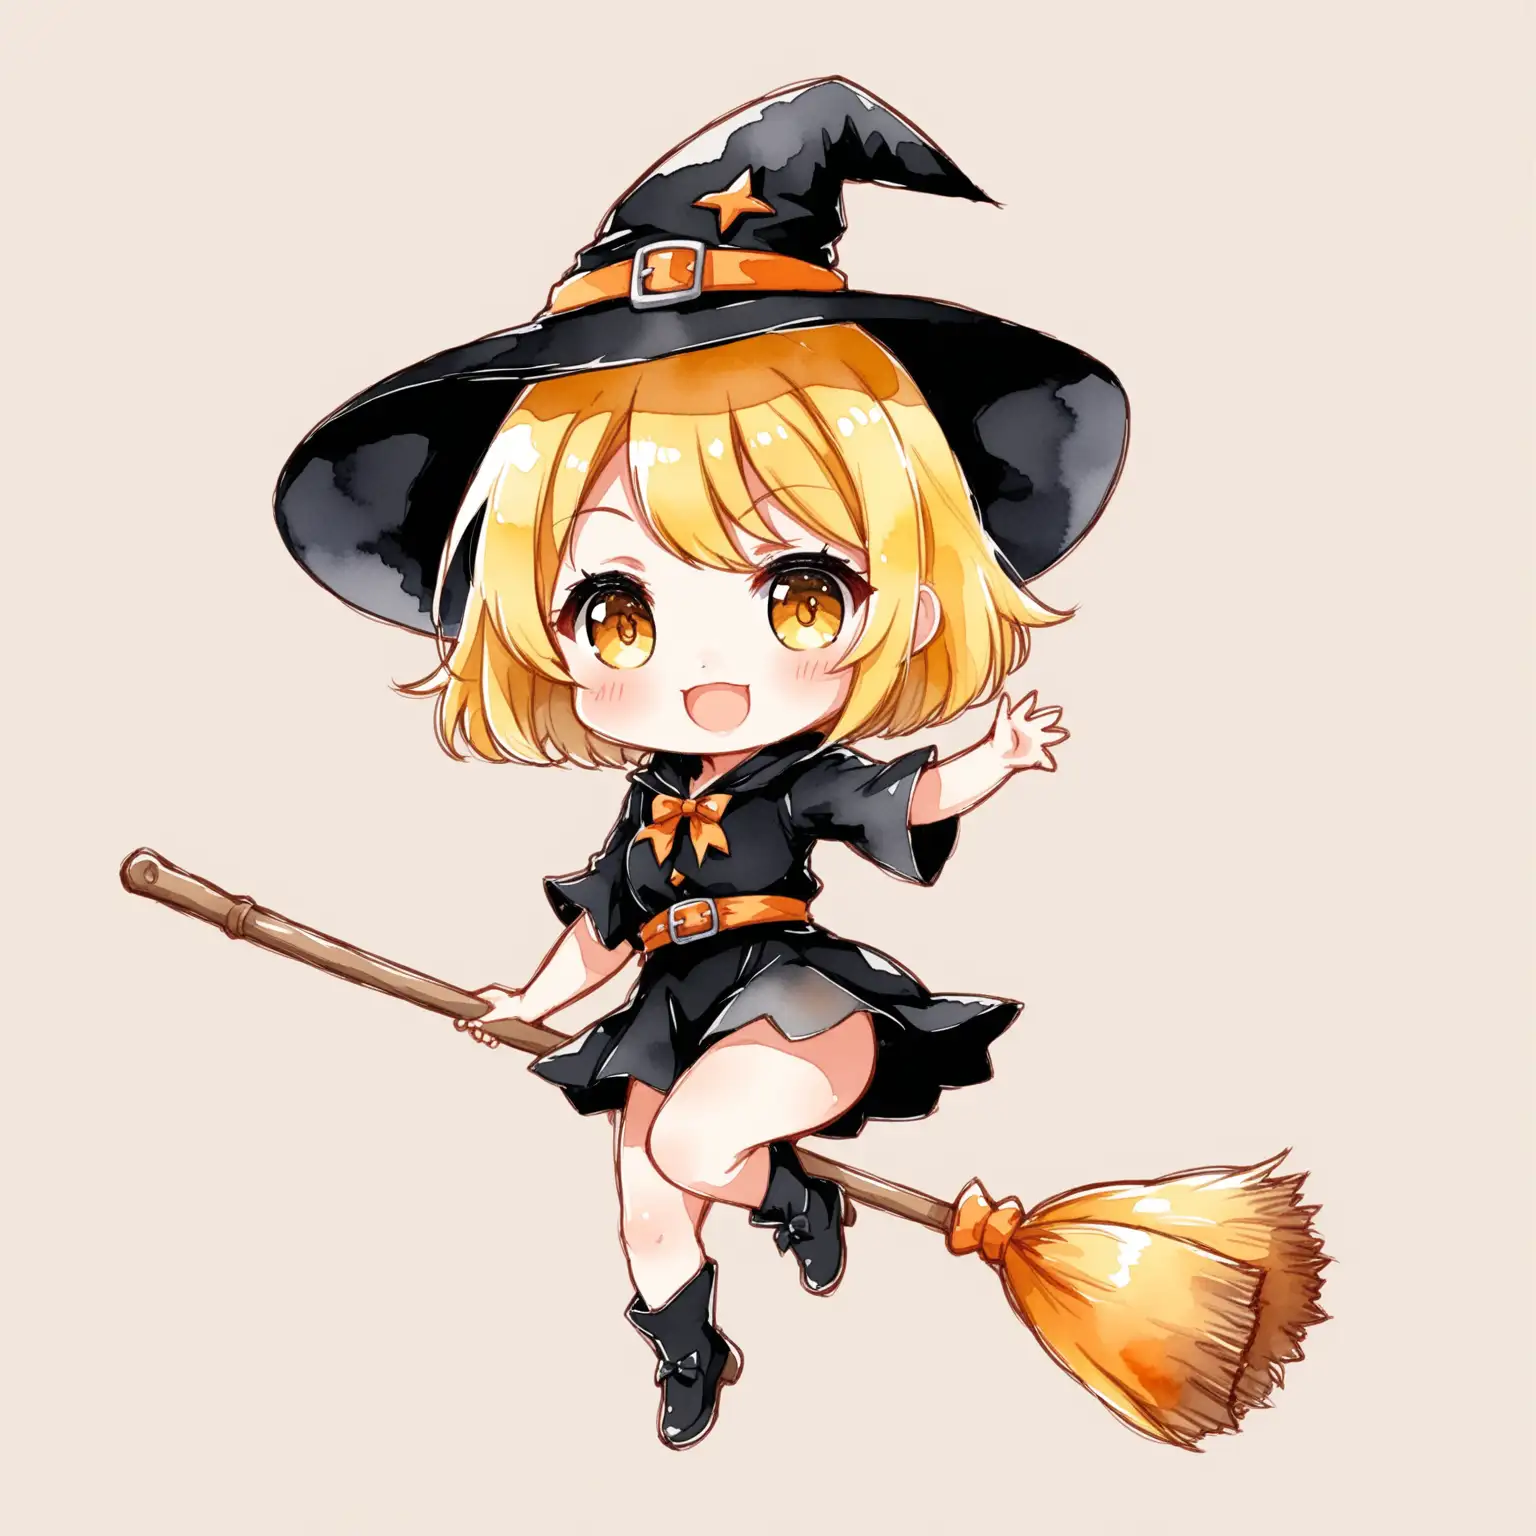 Playful Anime Witch Girl Riding Broom in Chibi Watercolor Style